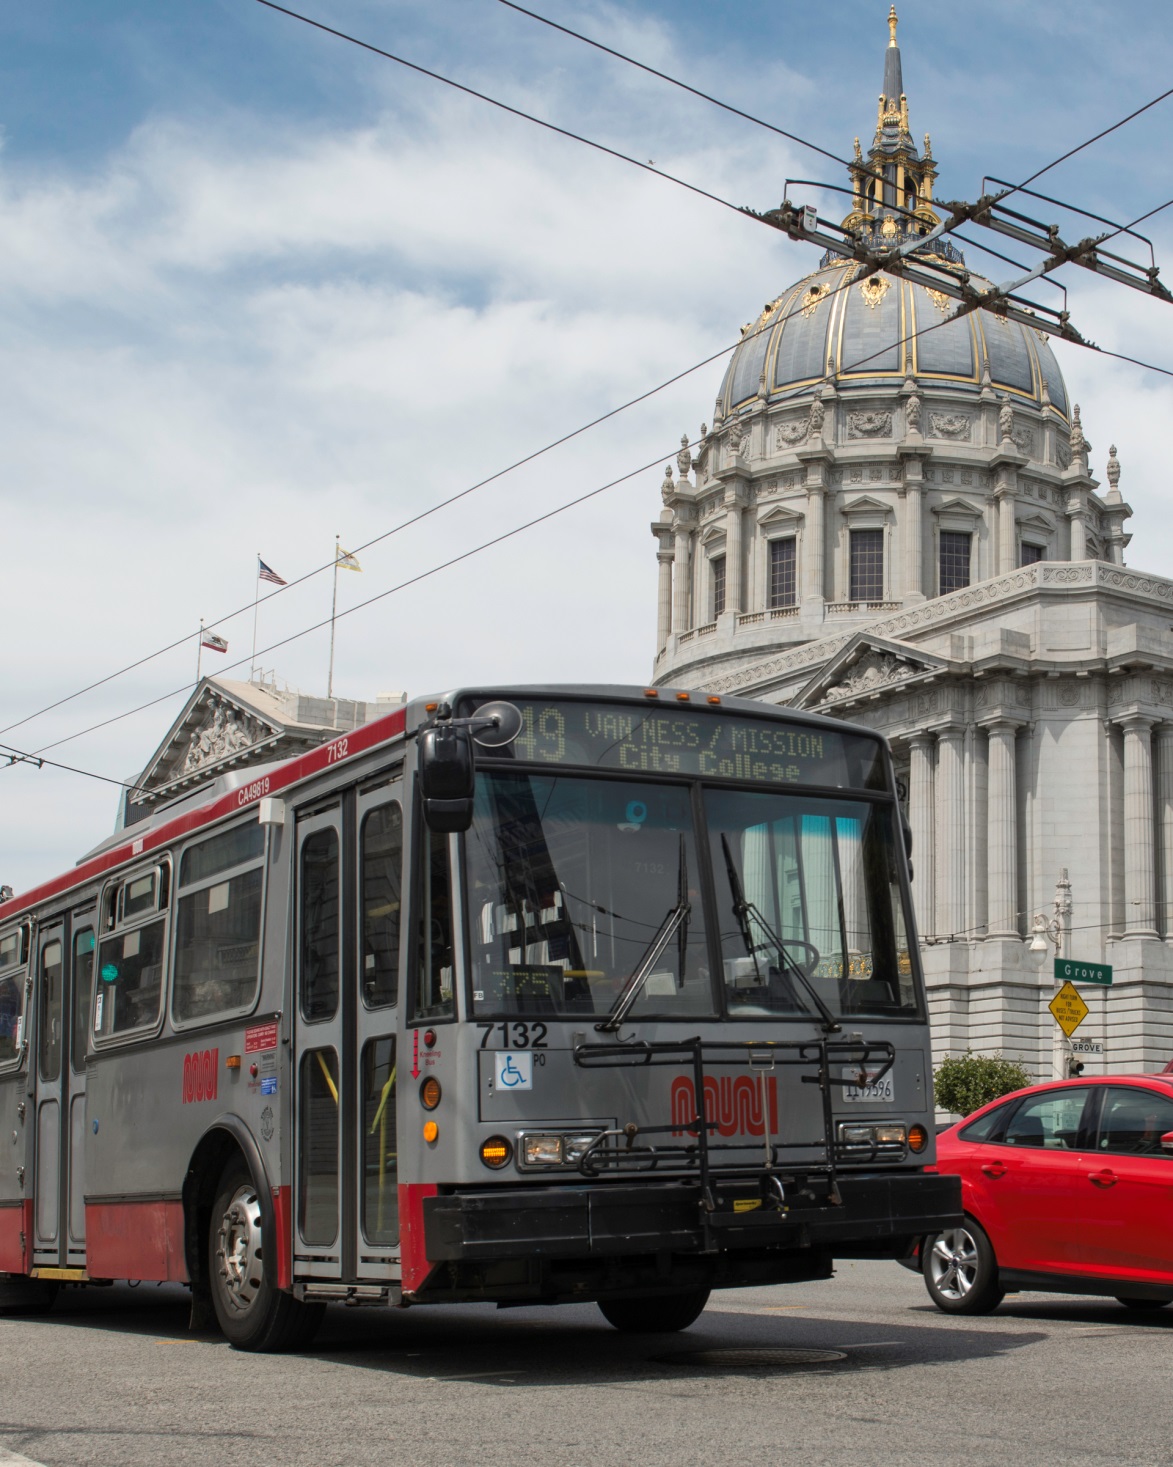 A red and gray Muni bus travels next to a red car on Van Ness Avenue with City Hall and overhead wires in the background.